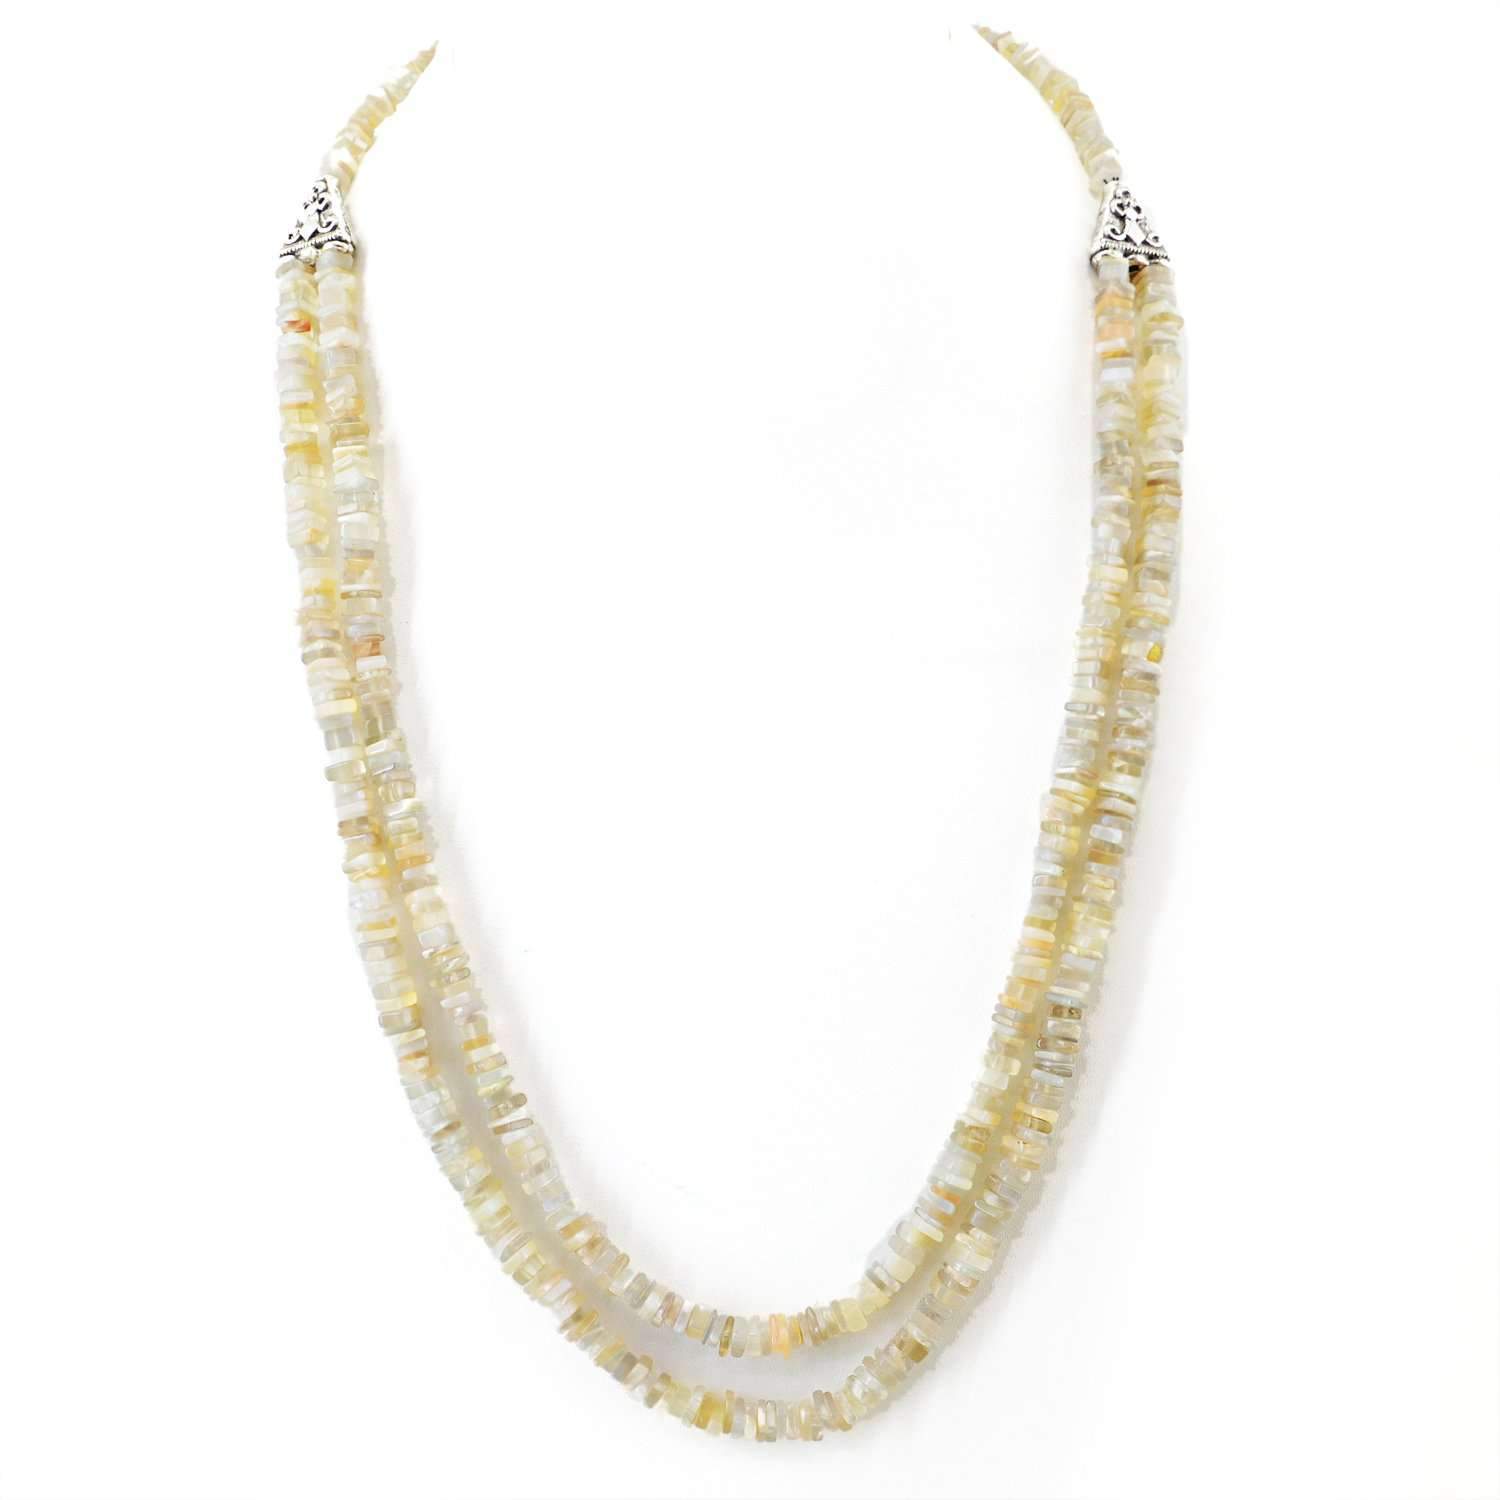 gemsmore:2 Strand Agate Necklace Natural Untreated Beads